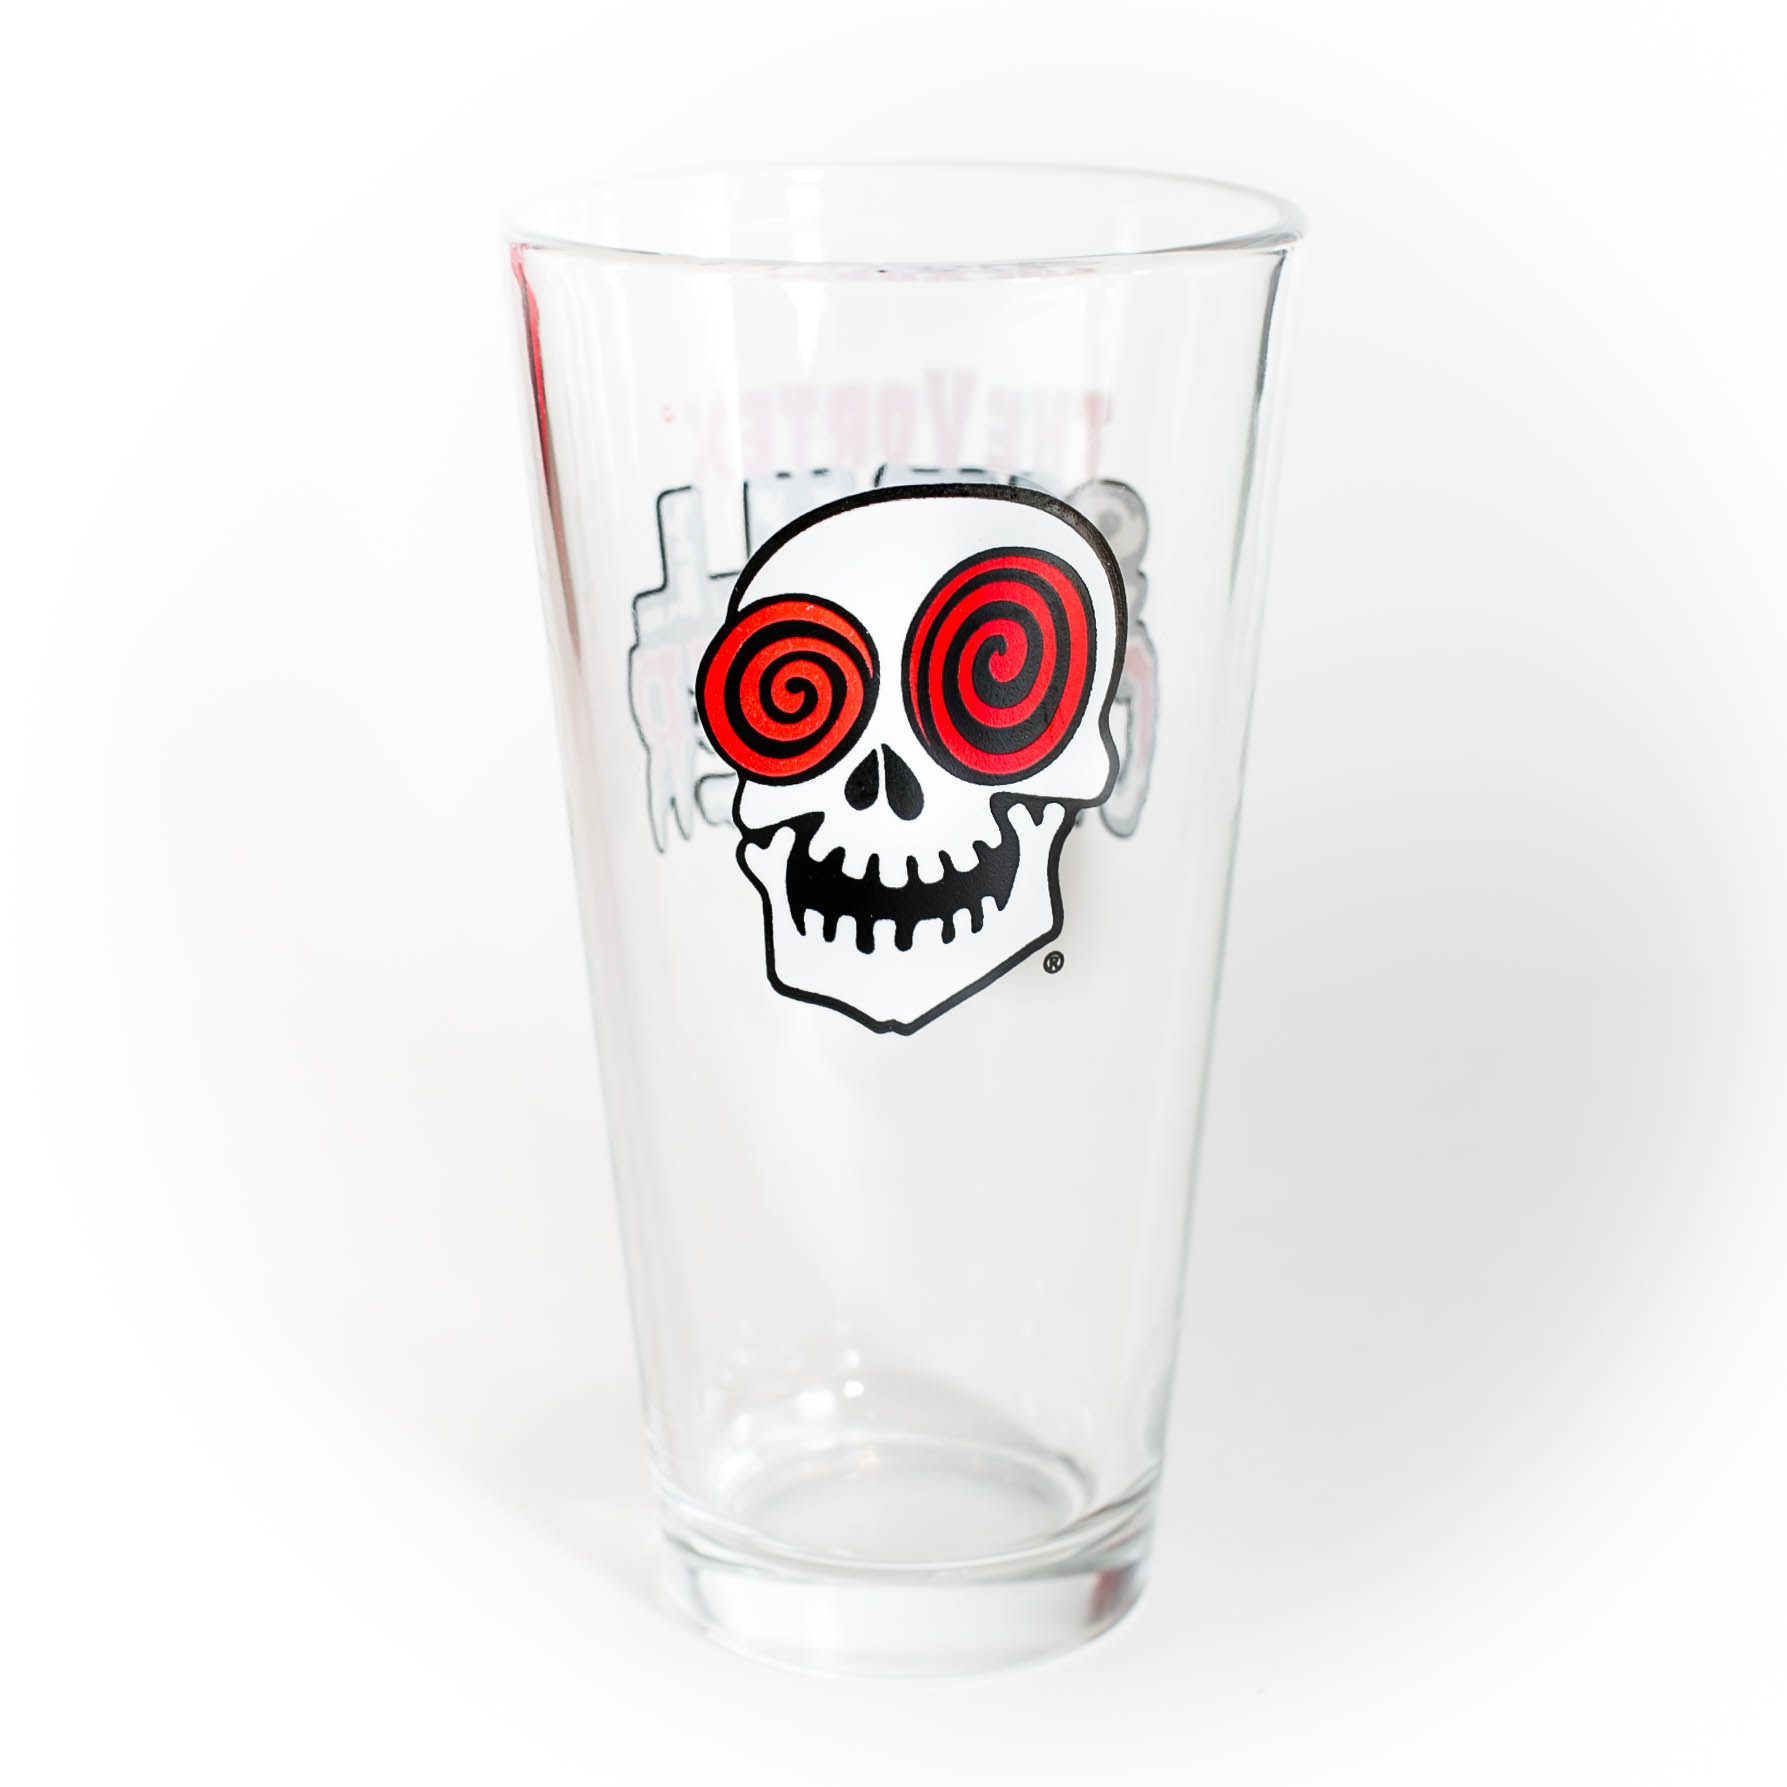 2 x 16oz Glasses Collectible Halloween Laughing Skull Vortex Beer  TWO 